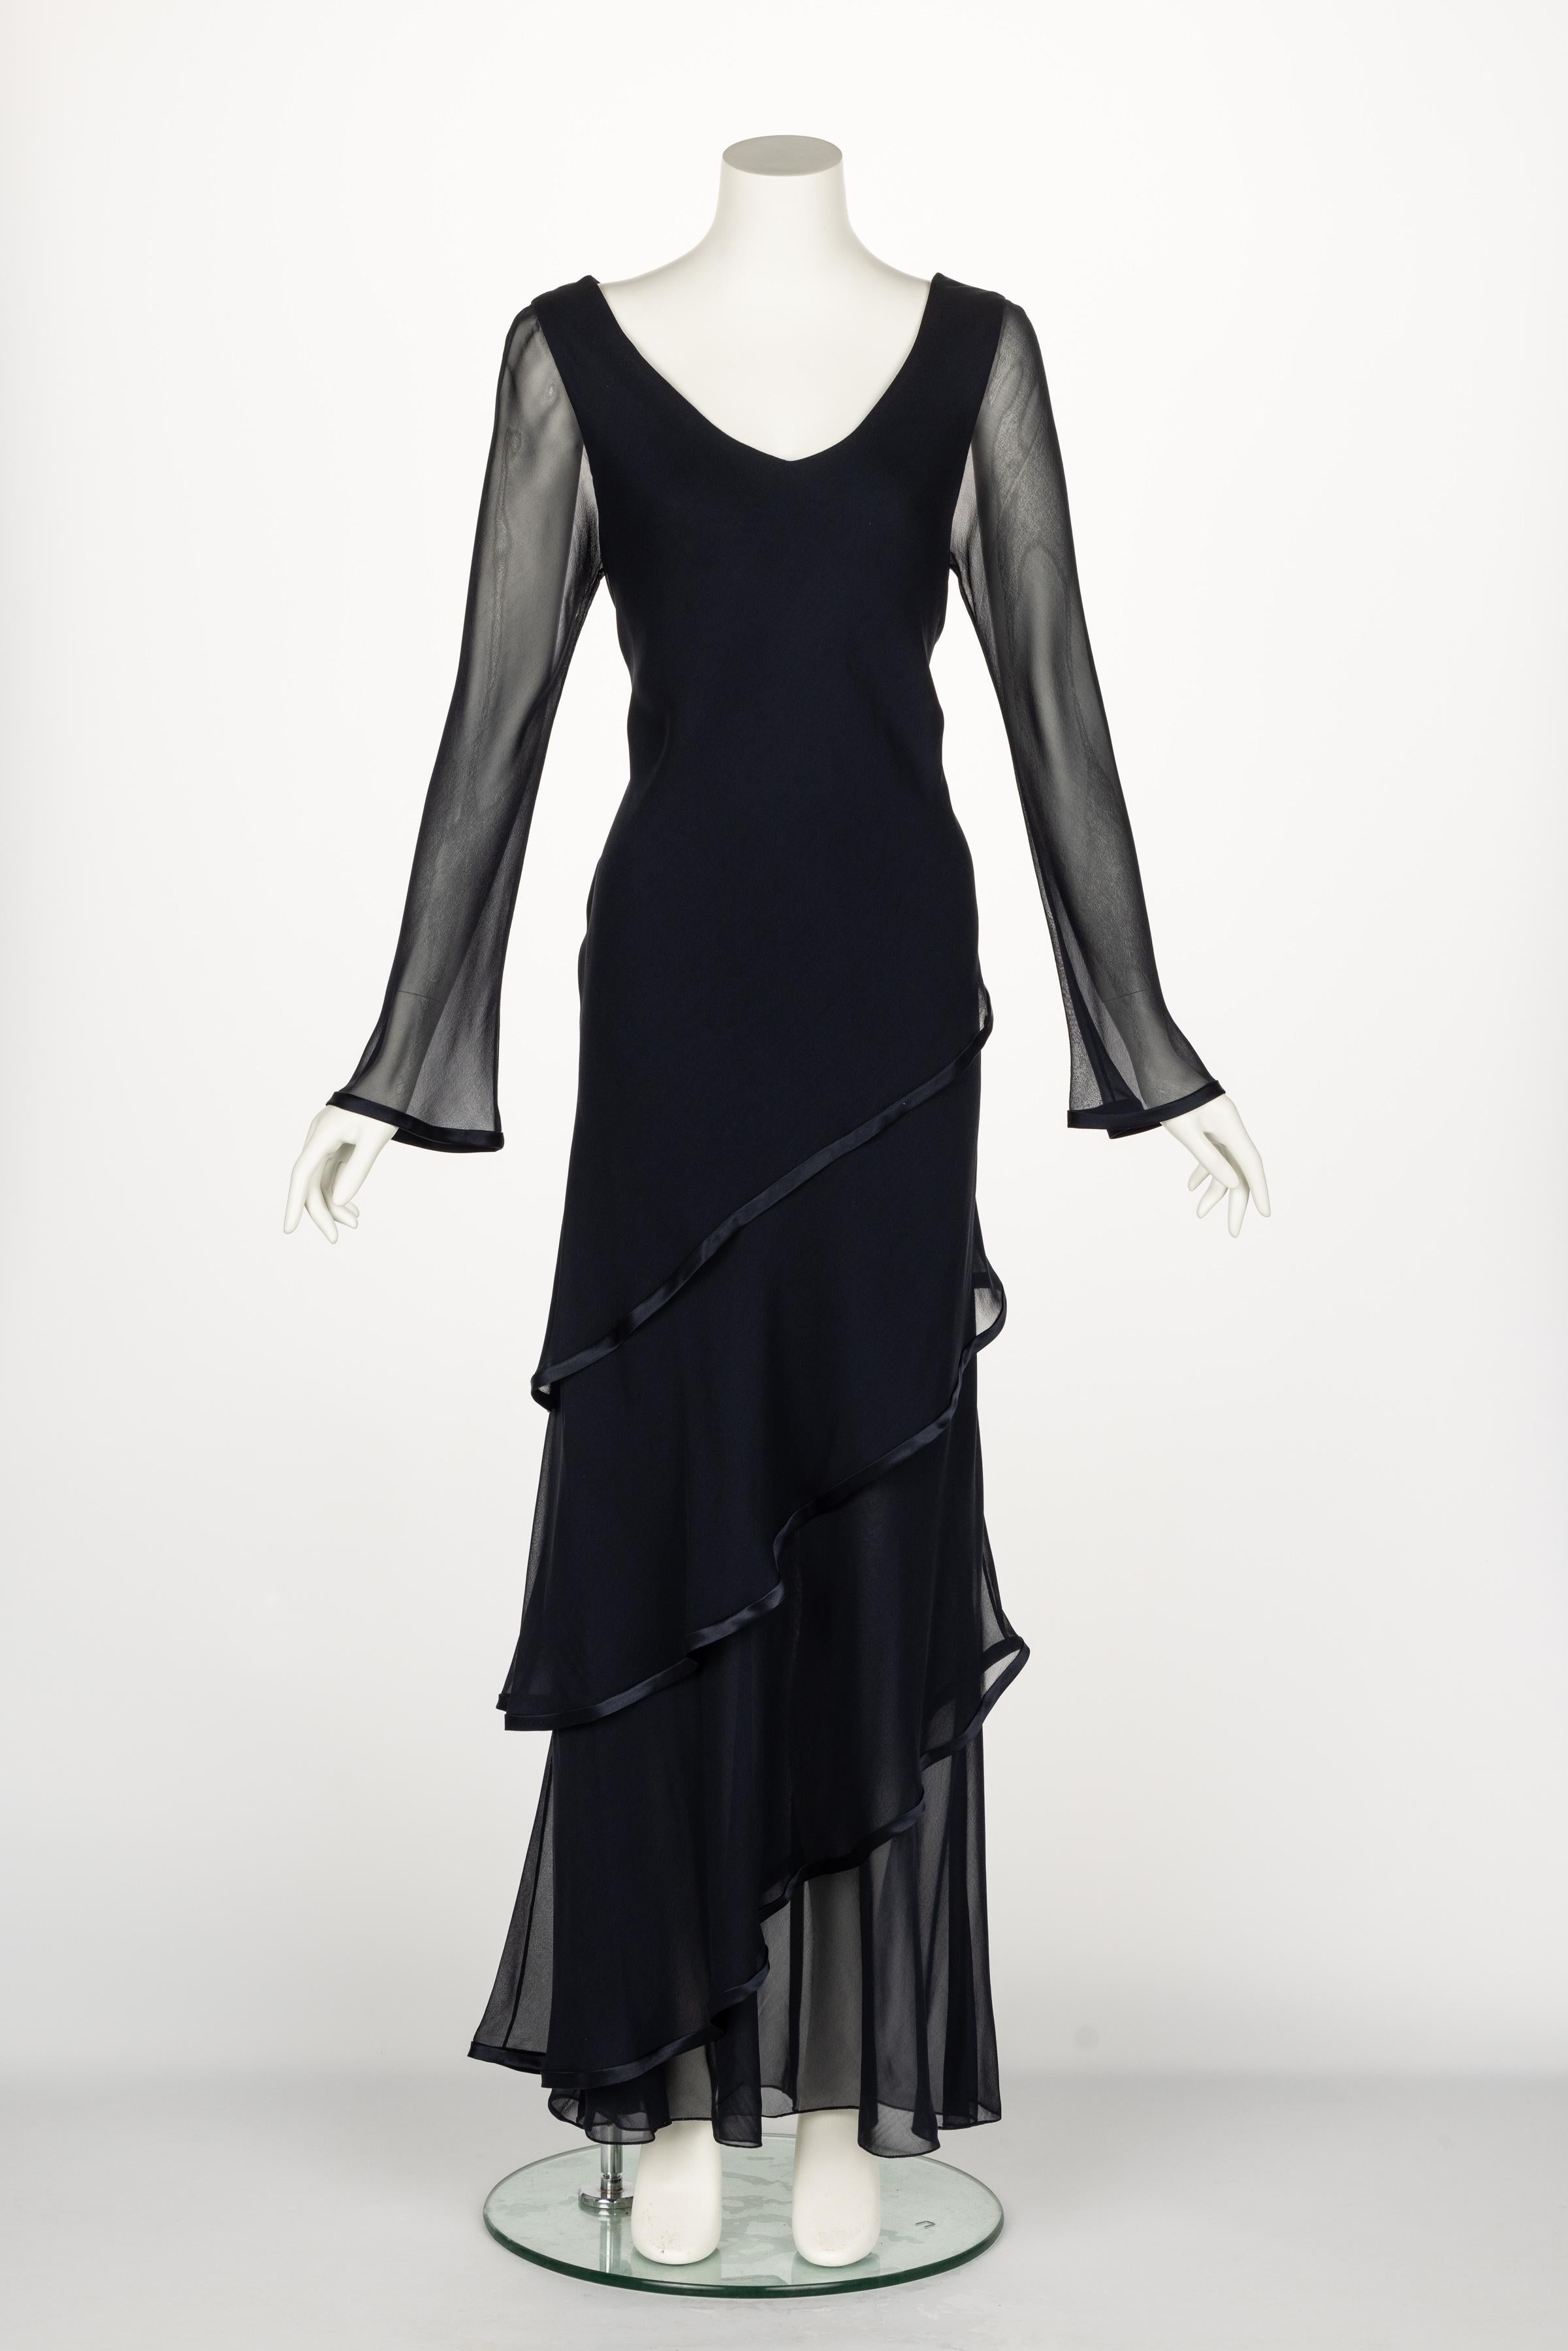 Holly’s Harp Black Silk chiffon Layered Maxi Dress 1970s In Excellent Condition For Sale In Boca Raton, FL